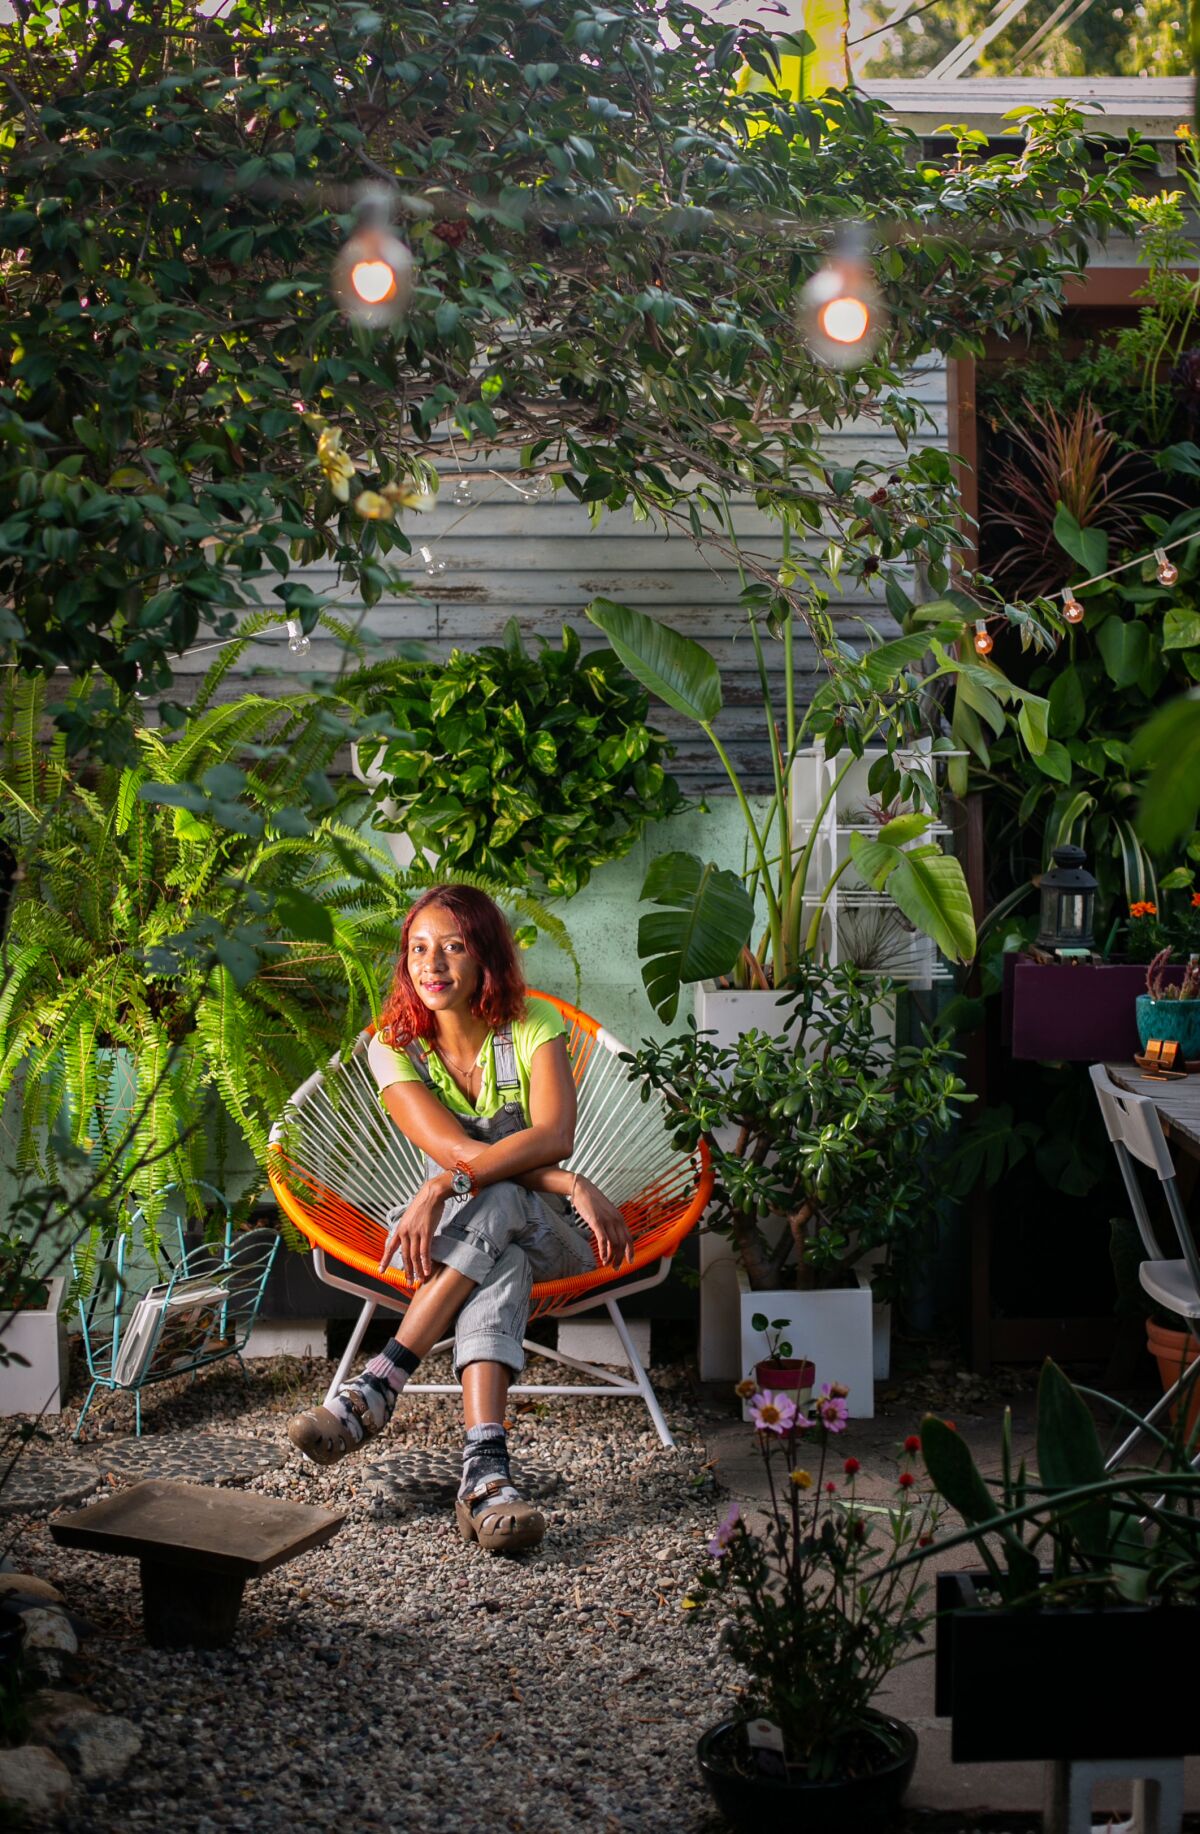 A woman sits in an orange Modern chair surrounded by plants